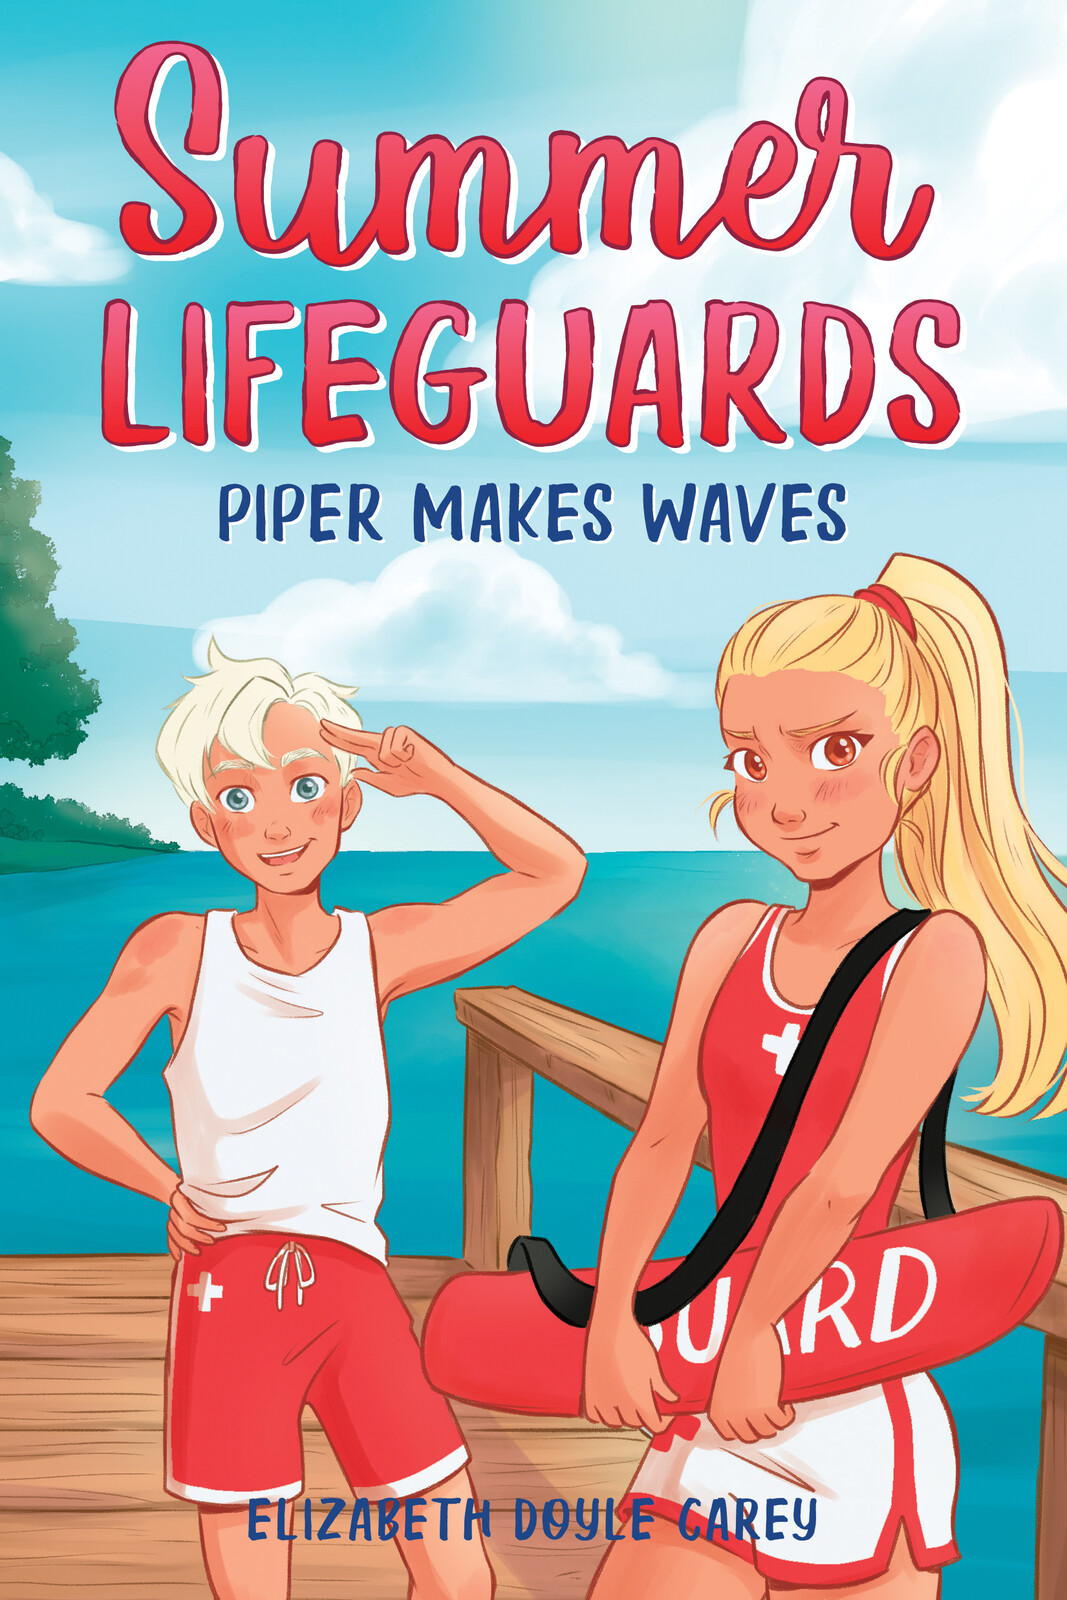 Cover for SUMMER LIFEGUARDS. PIPER MAKES WAVES (2021).
Written by Elizabeth Doyle Carey.